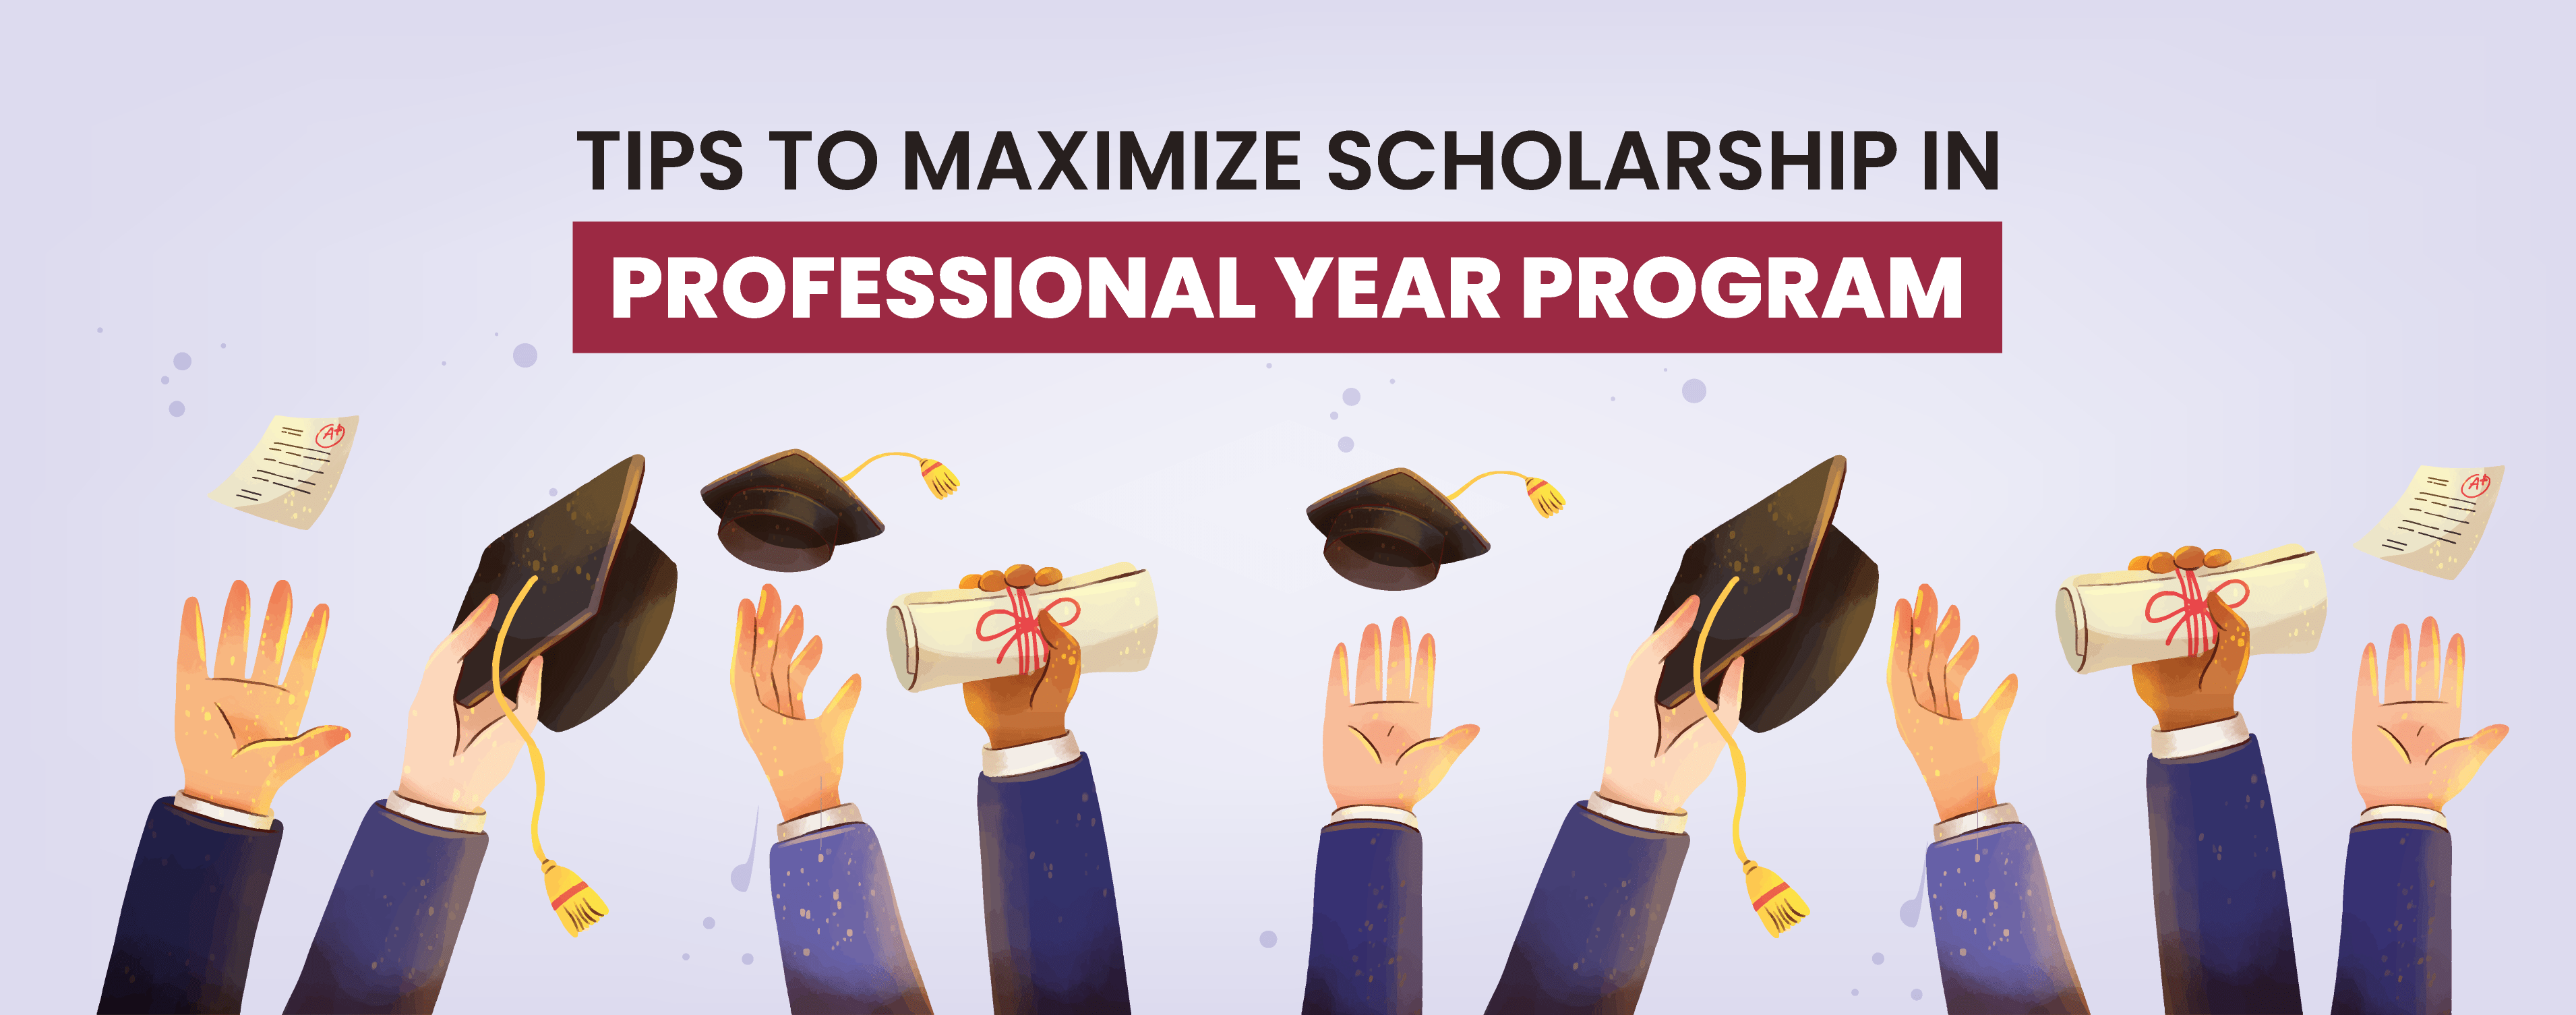 Tips for Maximizing Scholarships in the Professional Year Program in Australia